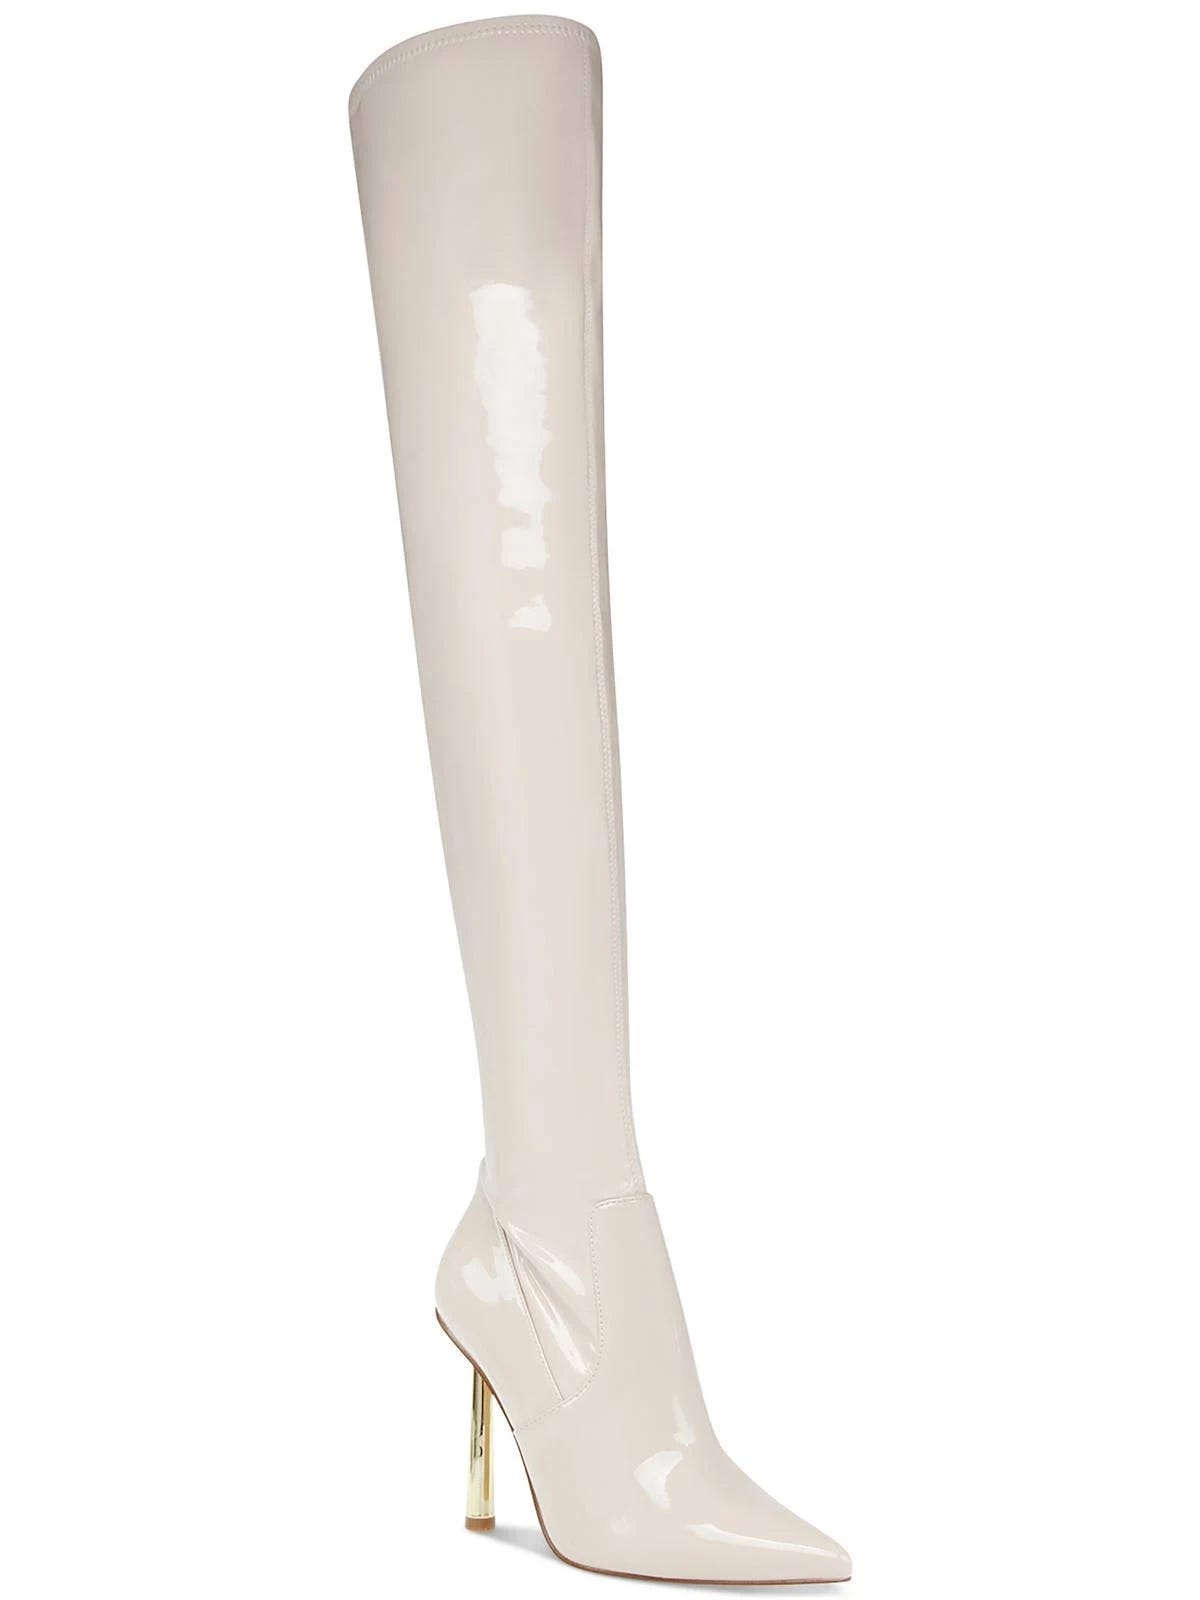 Stylish and Versatile Over-The-Knee Boots from Steve Madden | Image